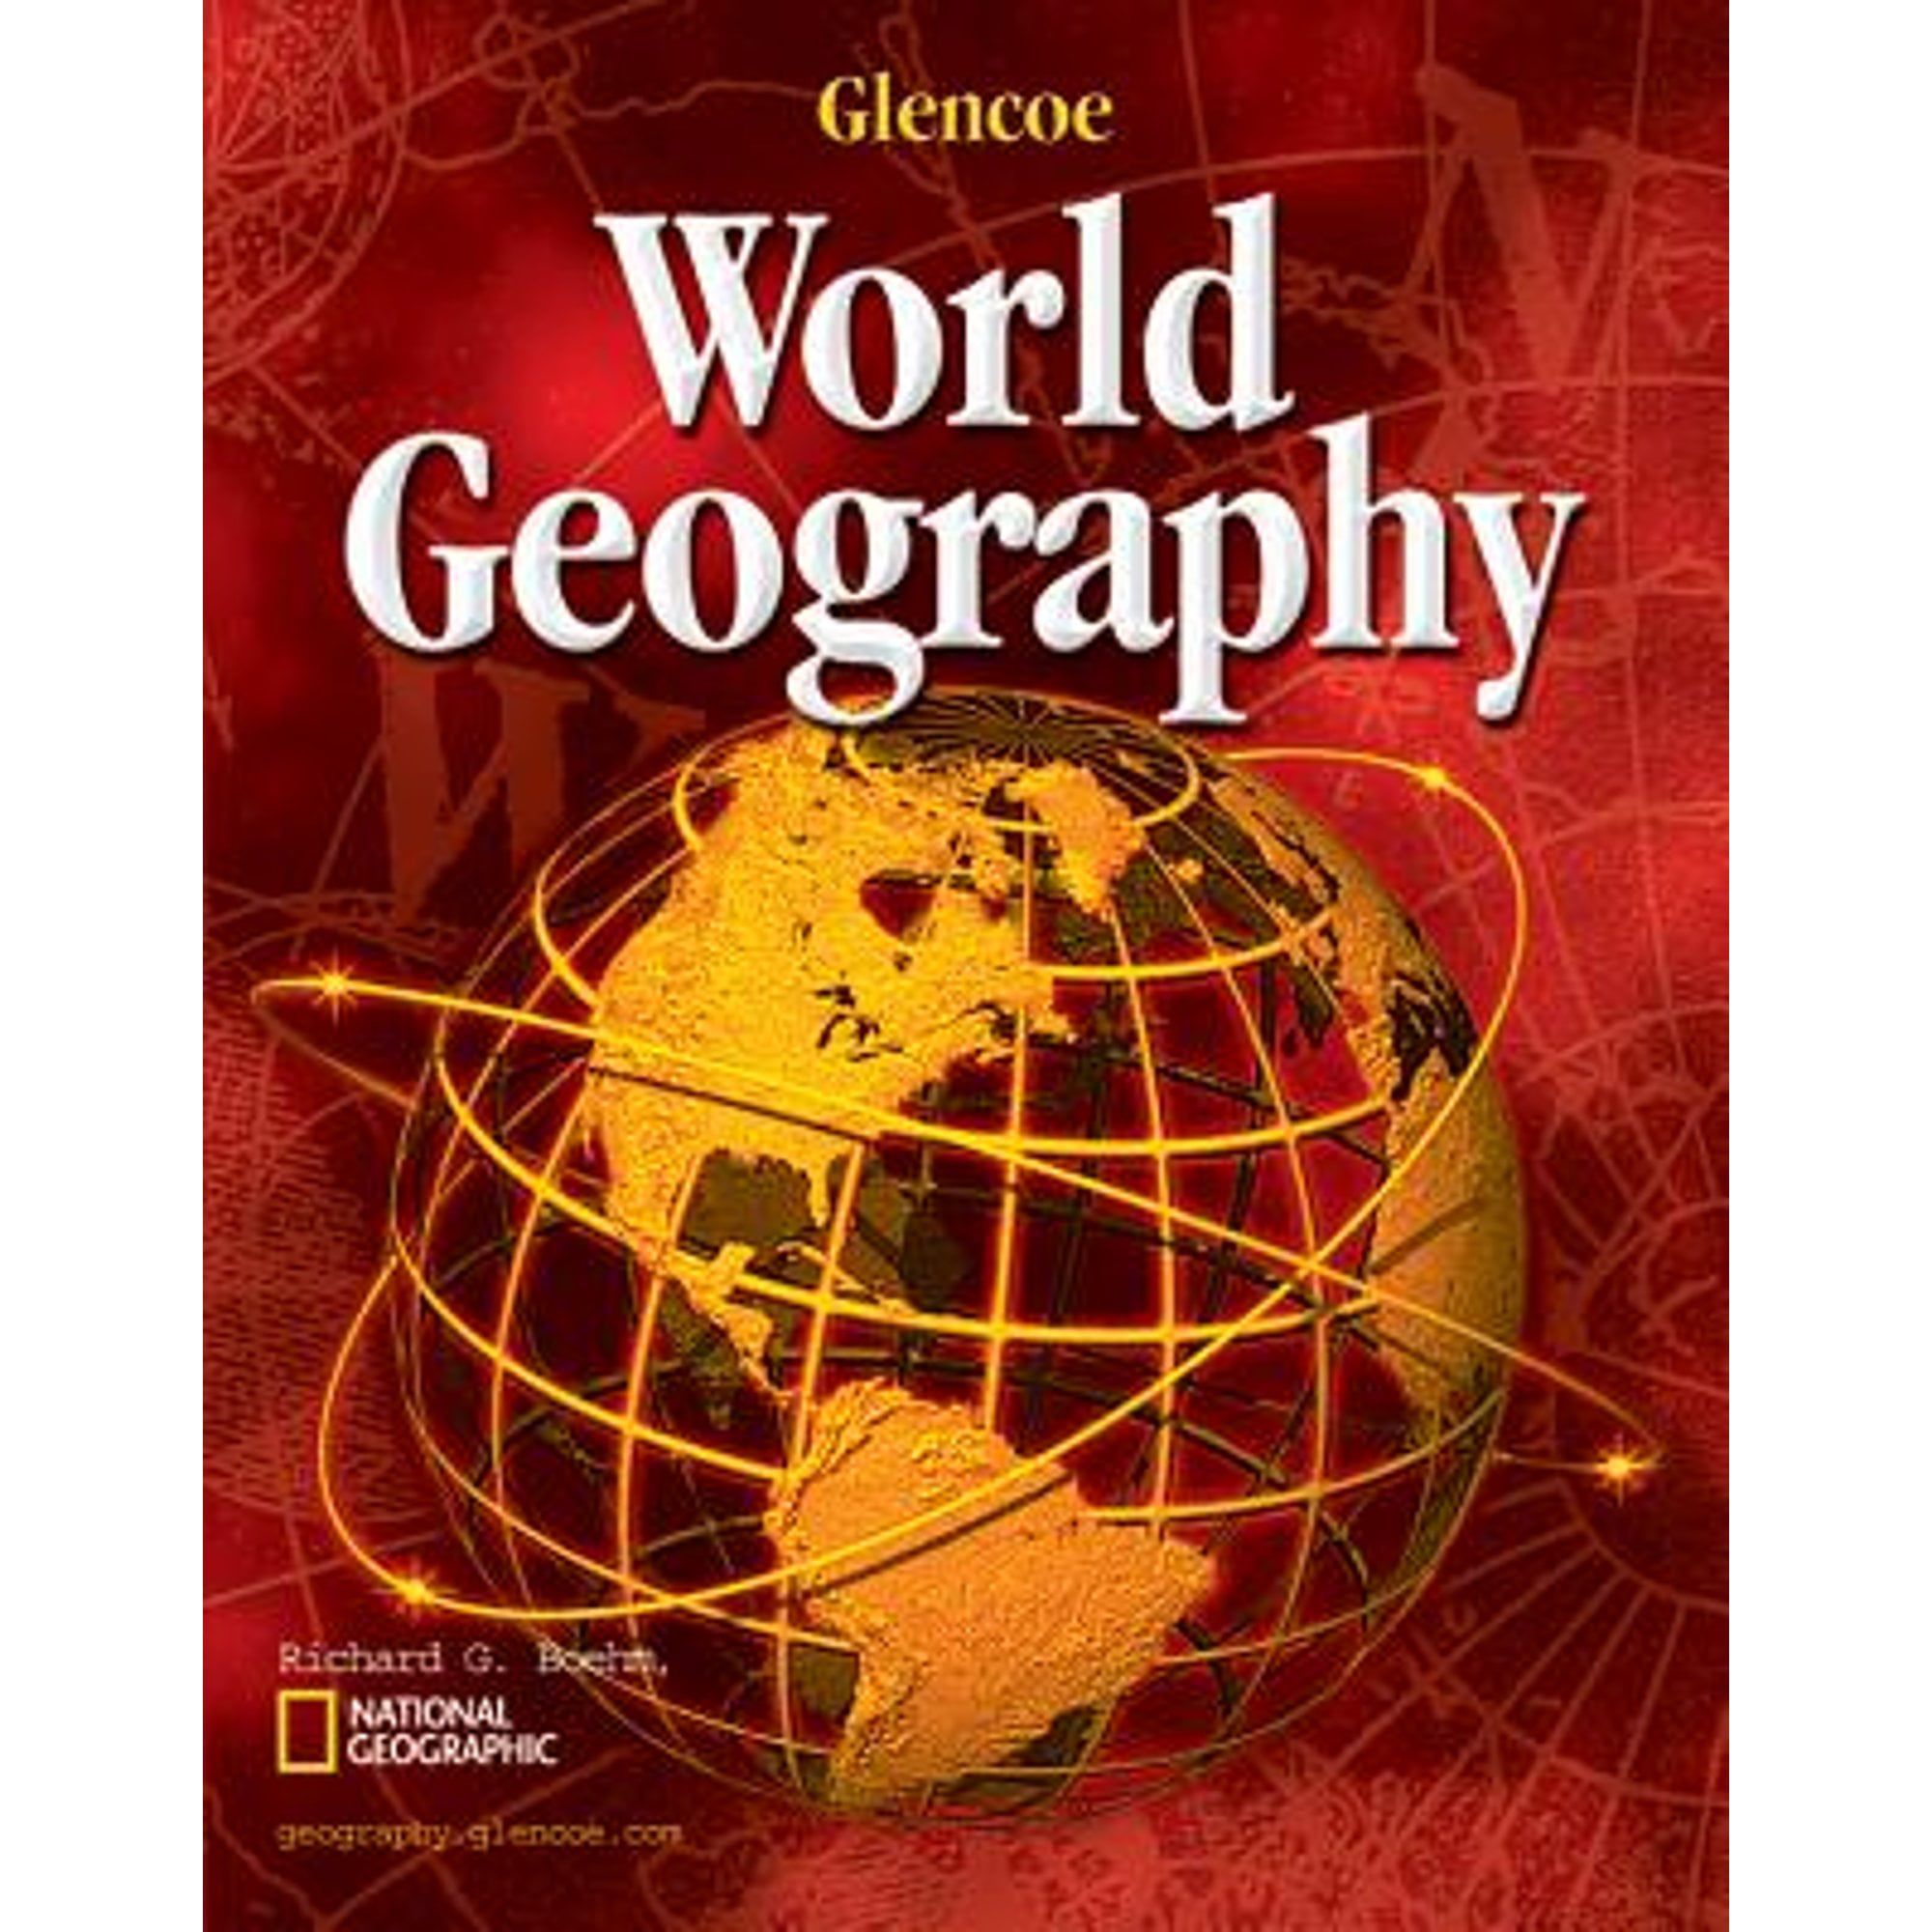 McGraw　Pre-Owned　9780026641739)　by　Geography,　Glencoe　World　(Hardcover　Student　Edition　Hill